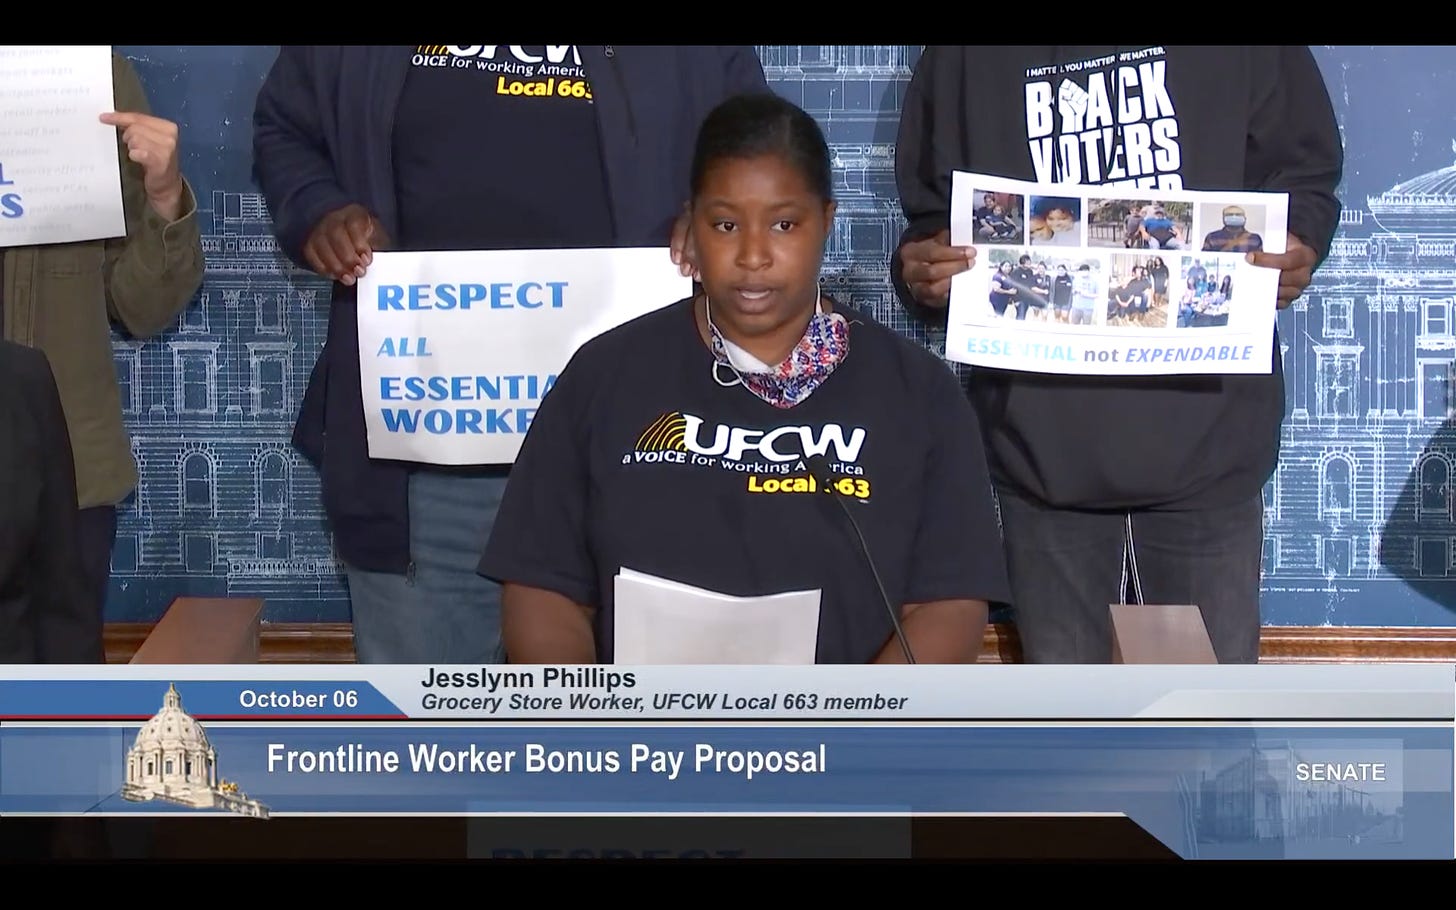 A black woman in a black tee shirt with white text reading UFCW Local 663 stands behind a podium, speaking